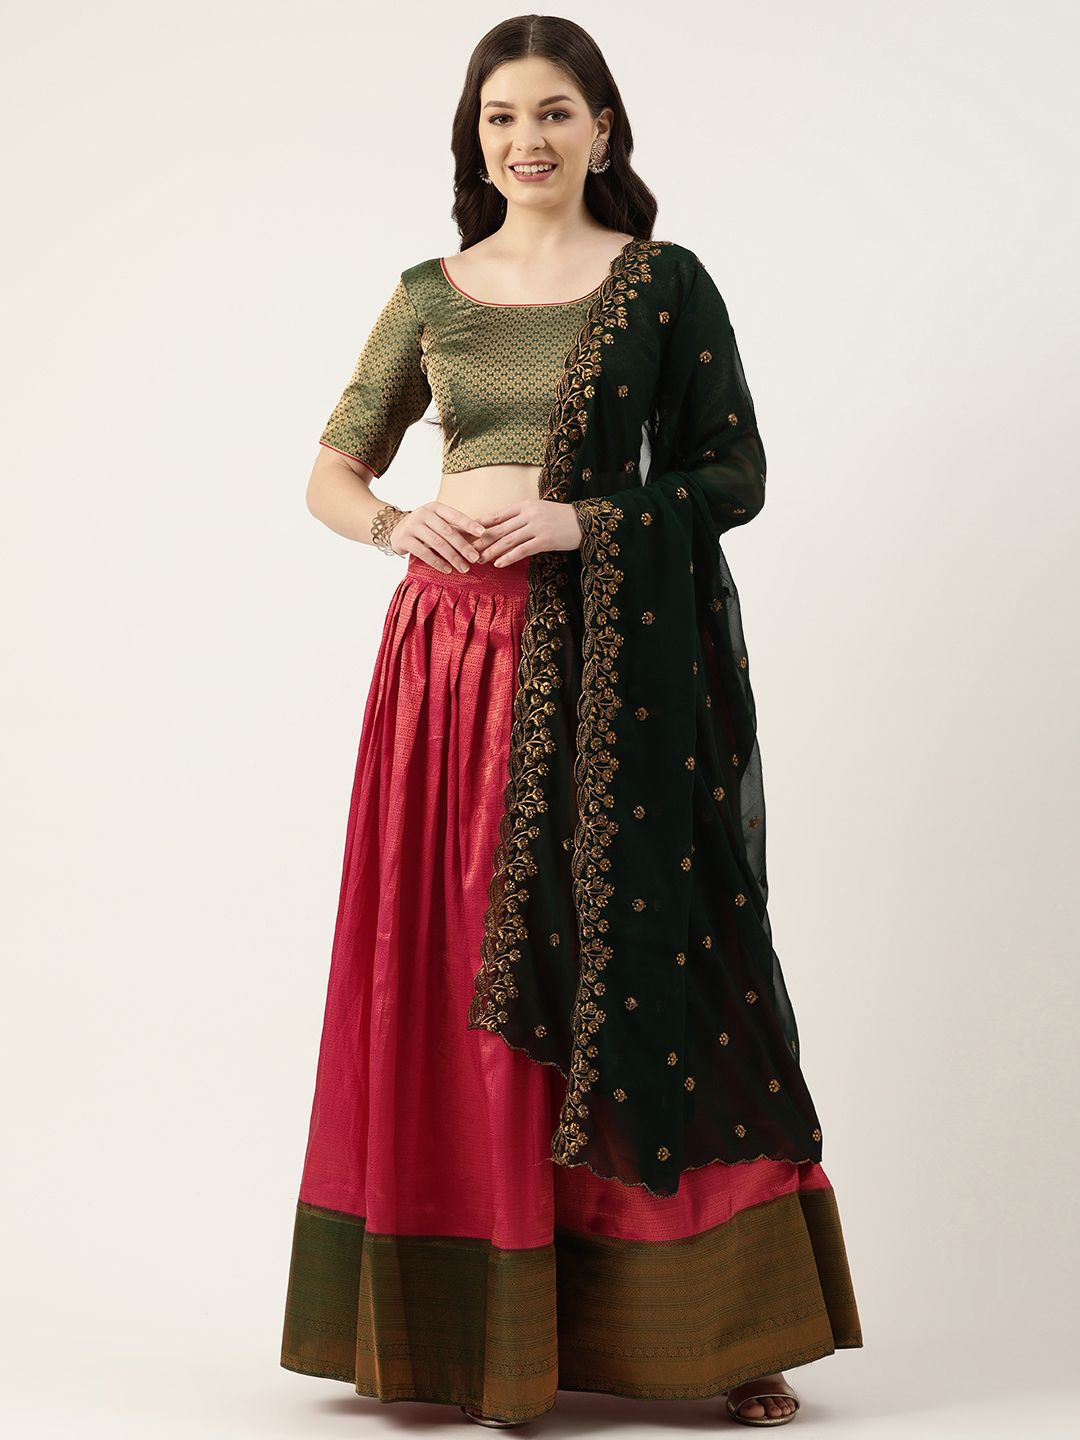 Pothys Pink & Green Unstitched Lehenga & Blouse With Dupatta Price in India